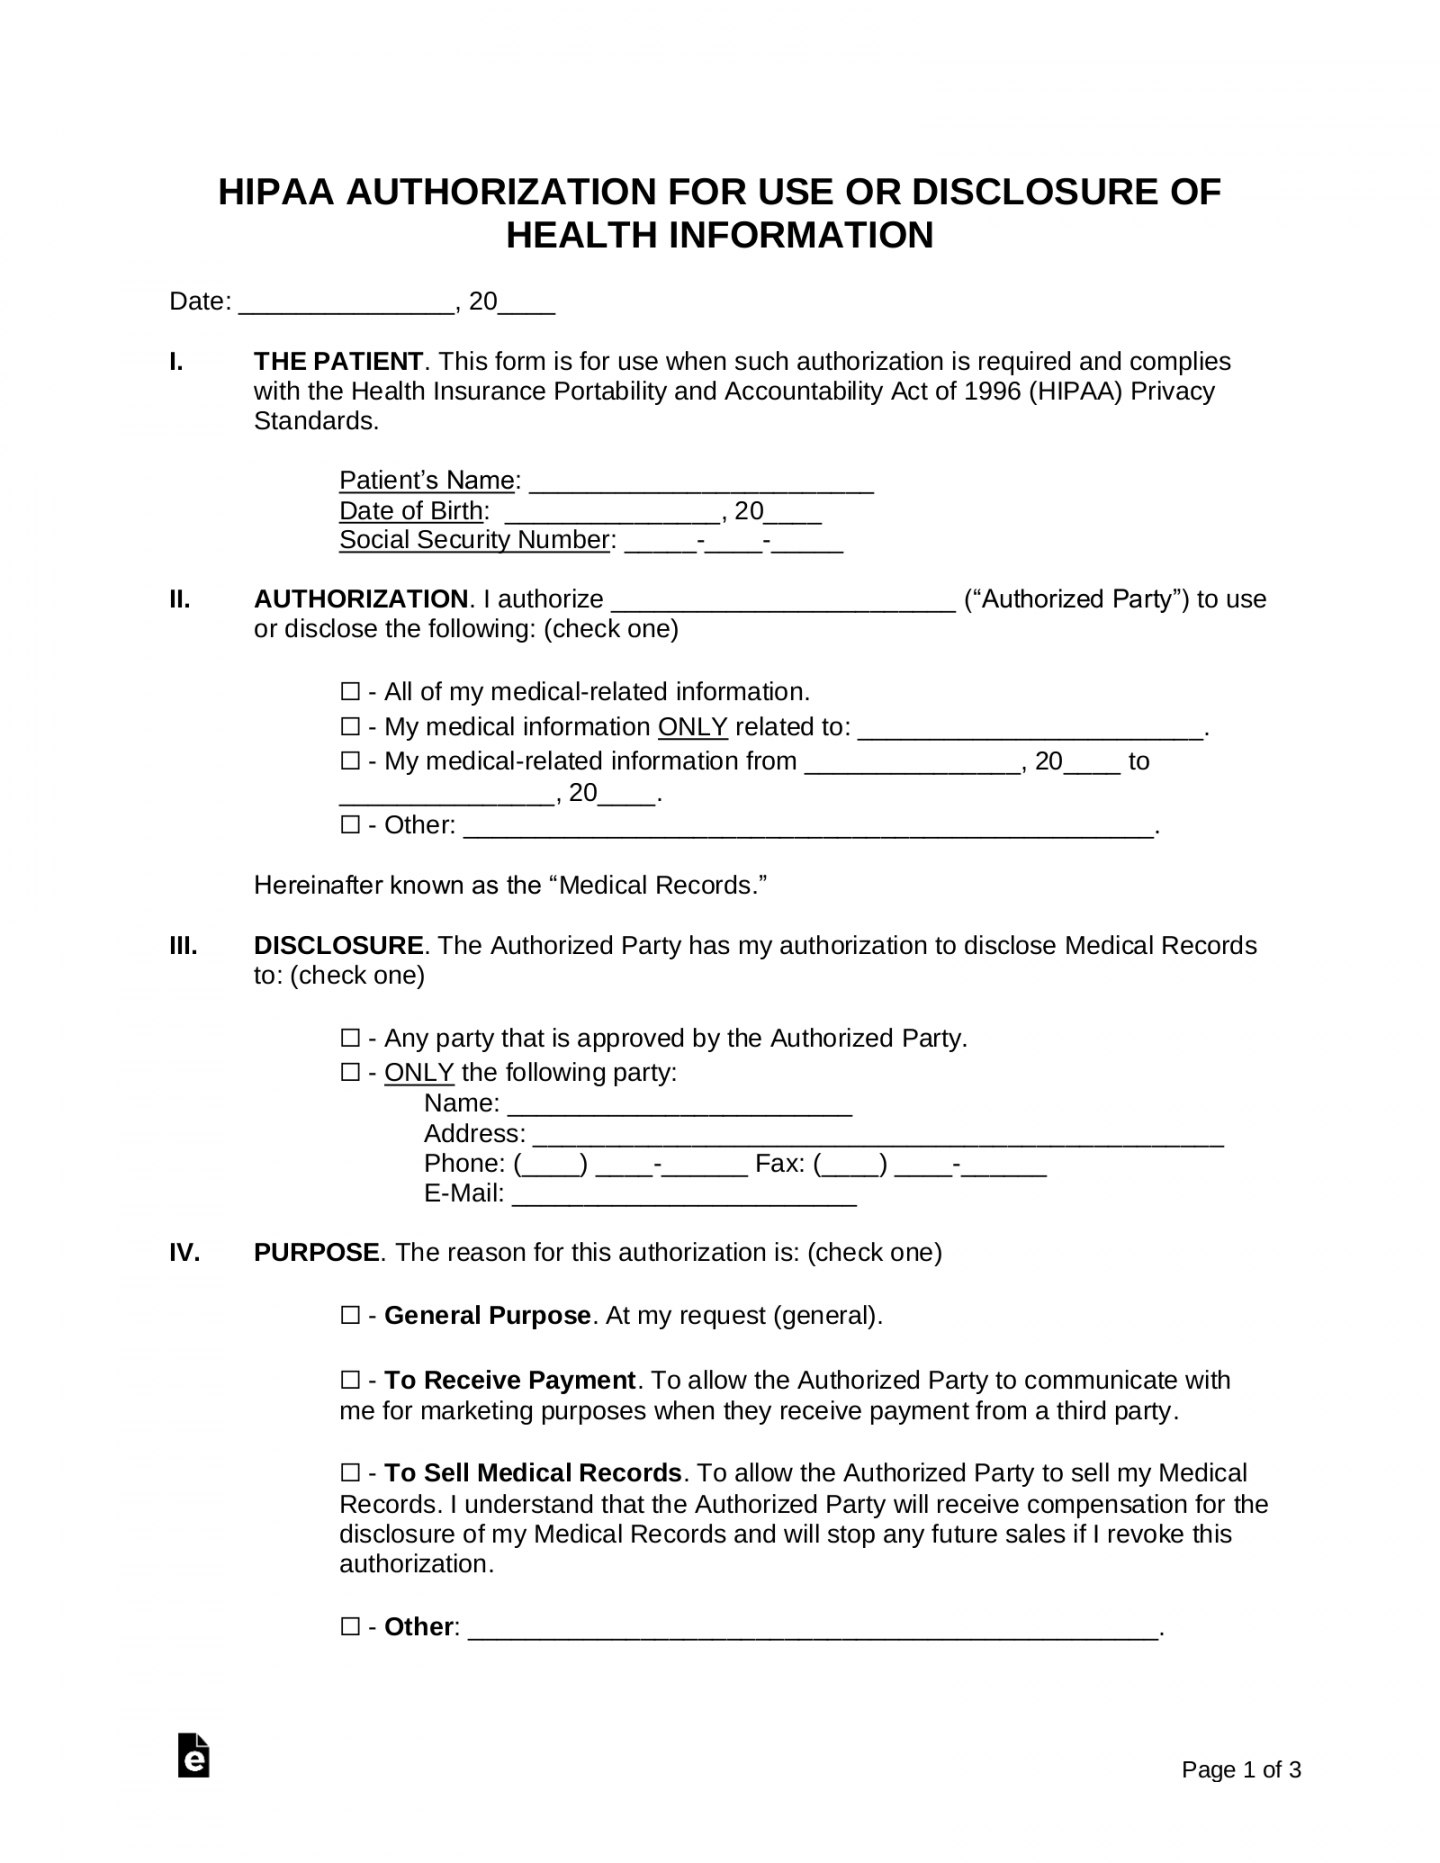 Free Printable Hipaa Forms - Printable - Free Medical Records Release Authorization Form  HIPAA - PDF